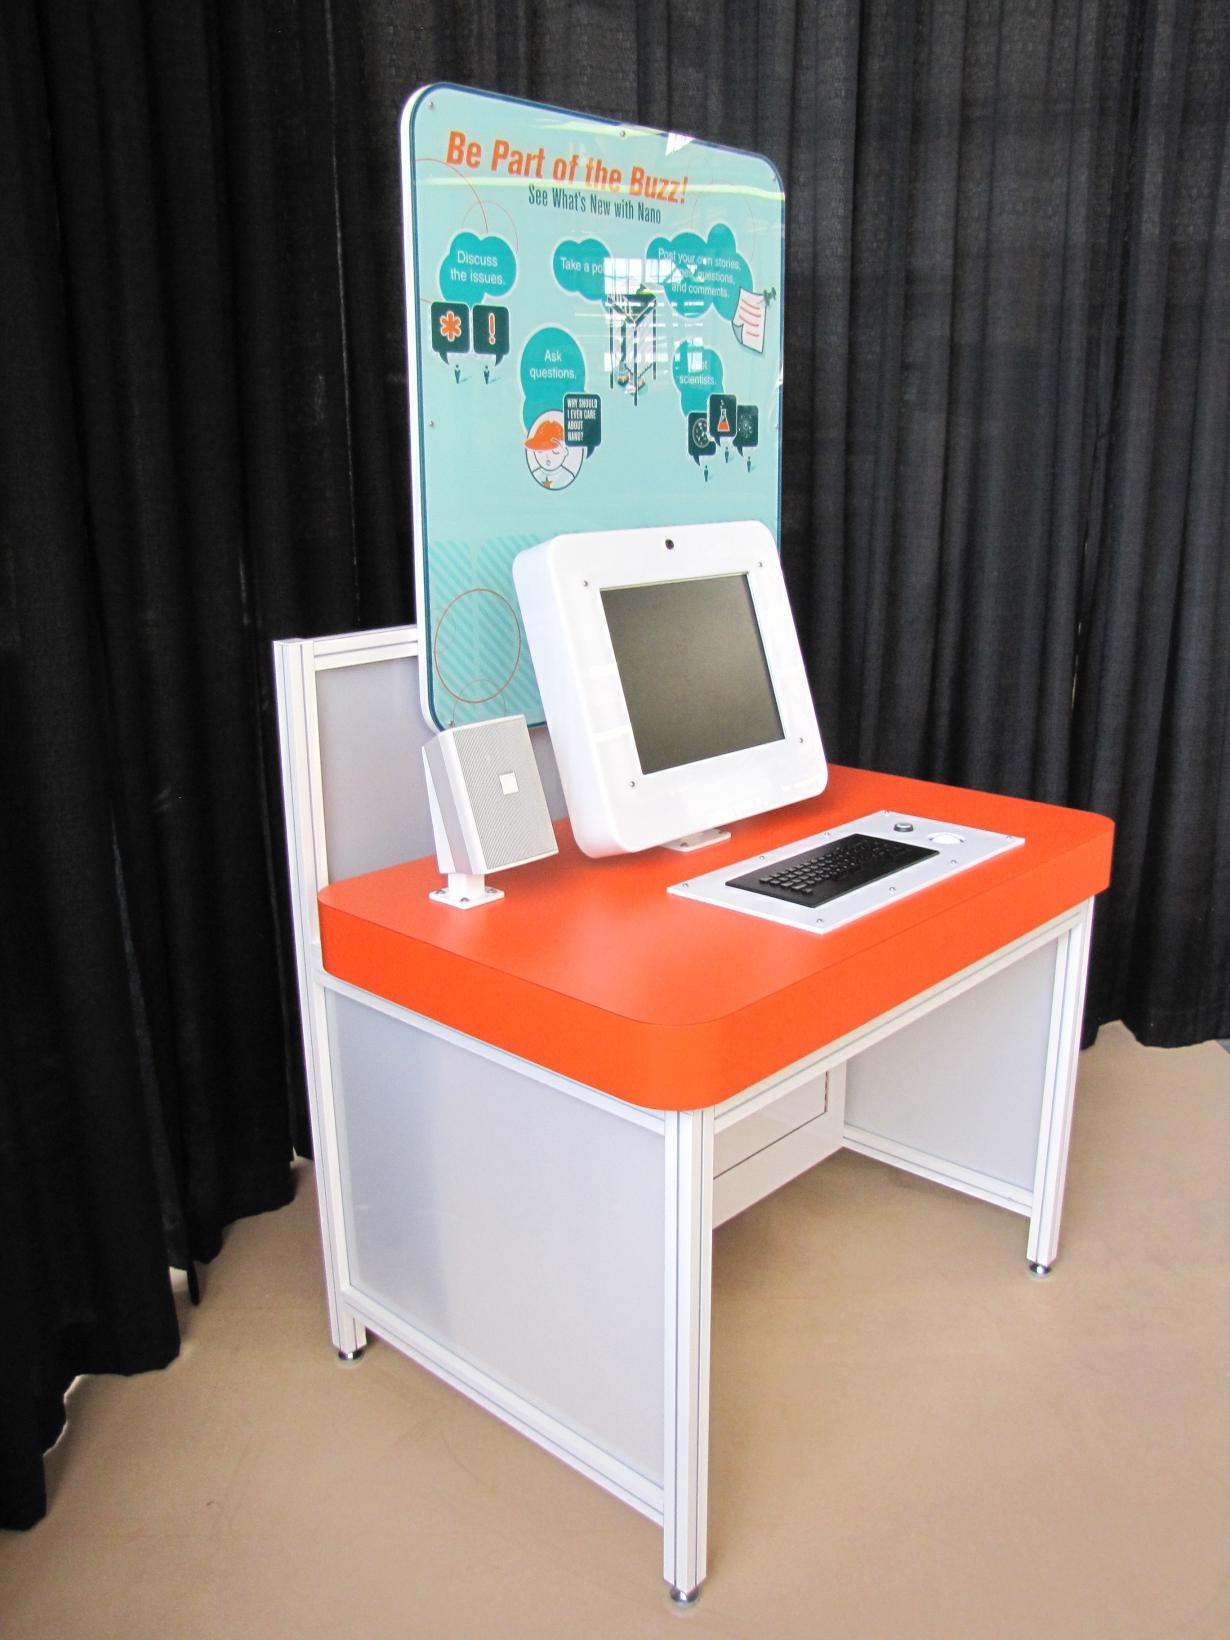 Large blue and orange desk interactive exhibit with a computer that allows participants to find more information on nanoscience